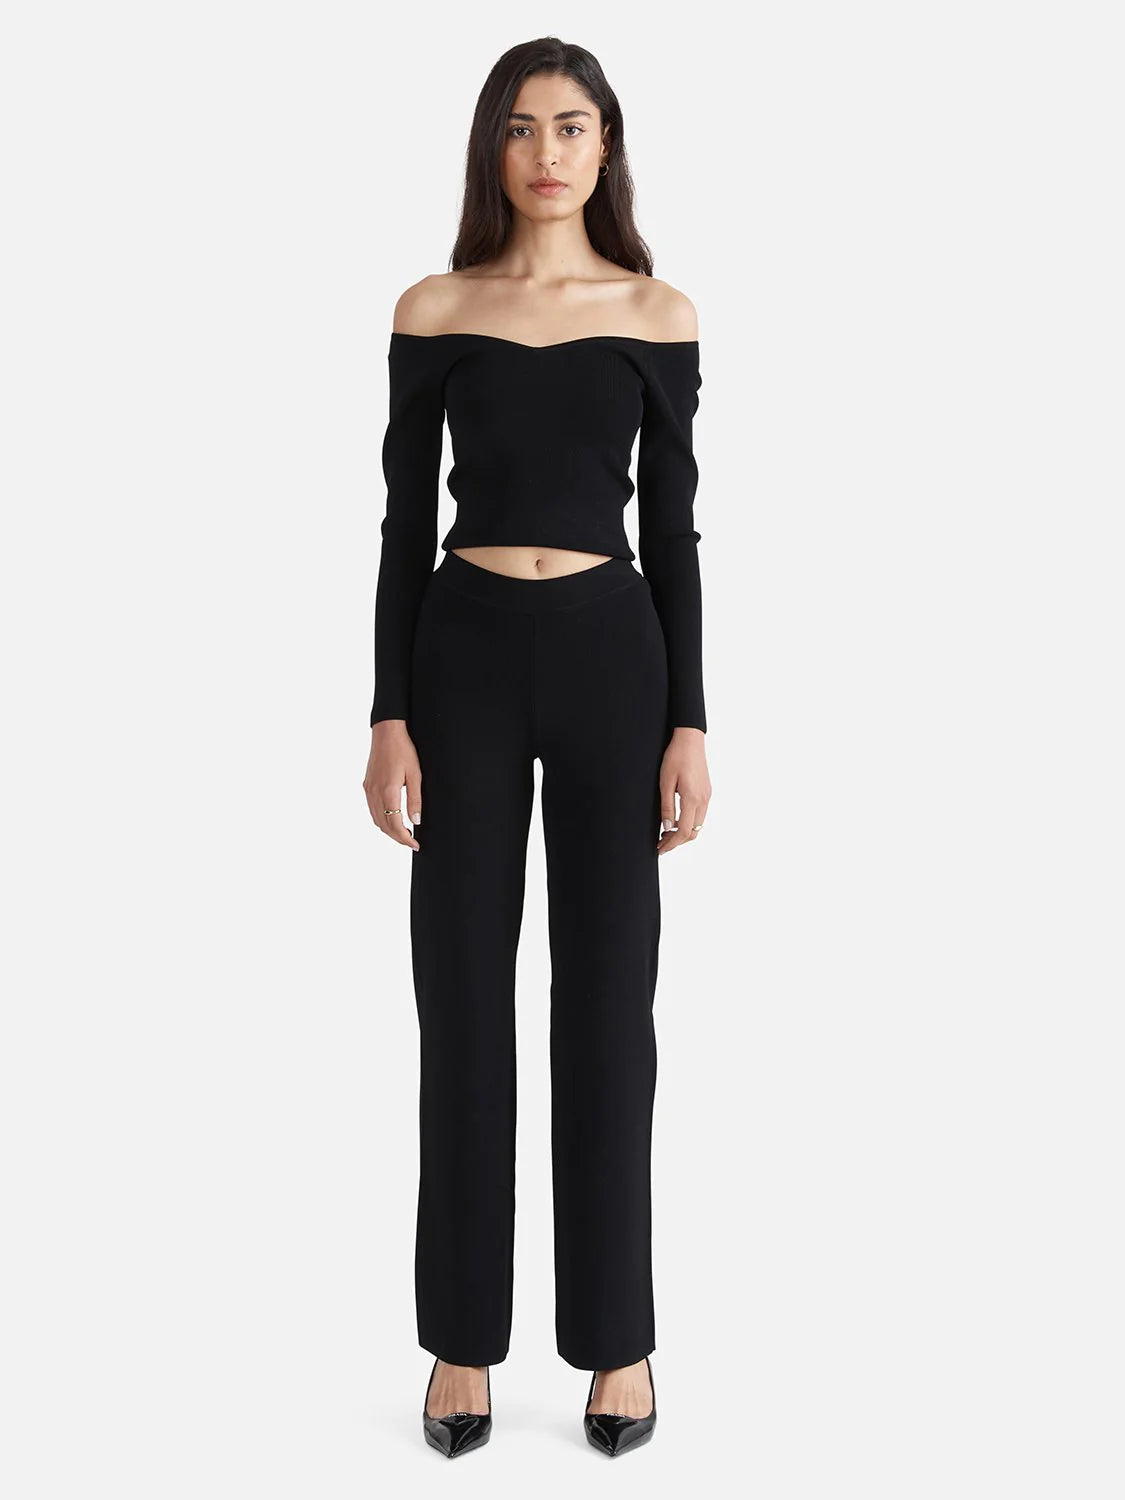 EVIE LUXE KNIT PANT